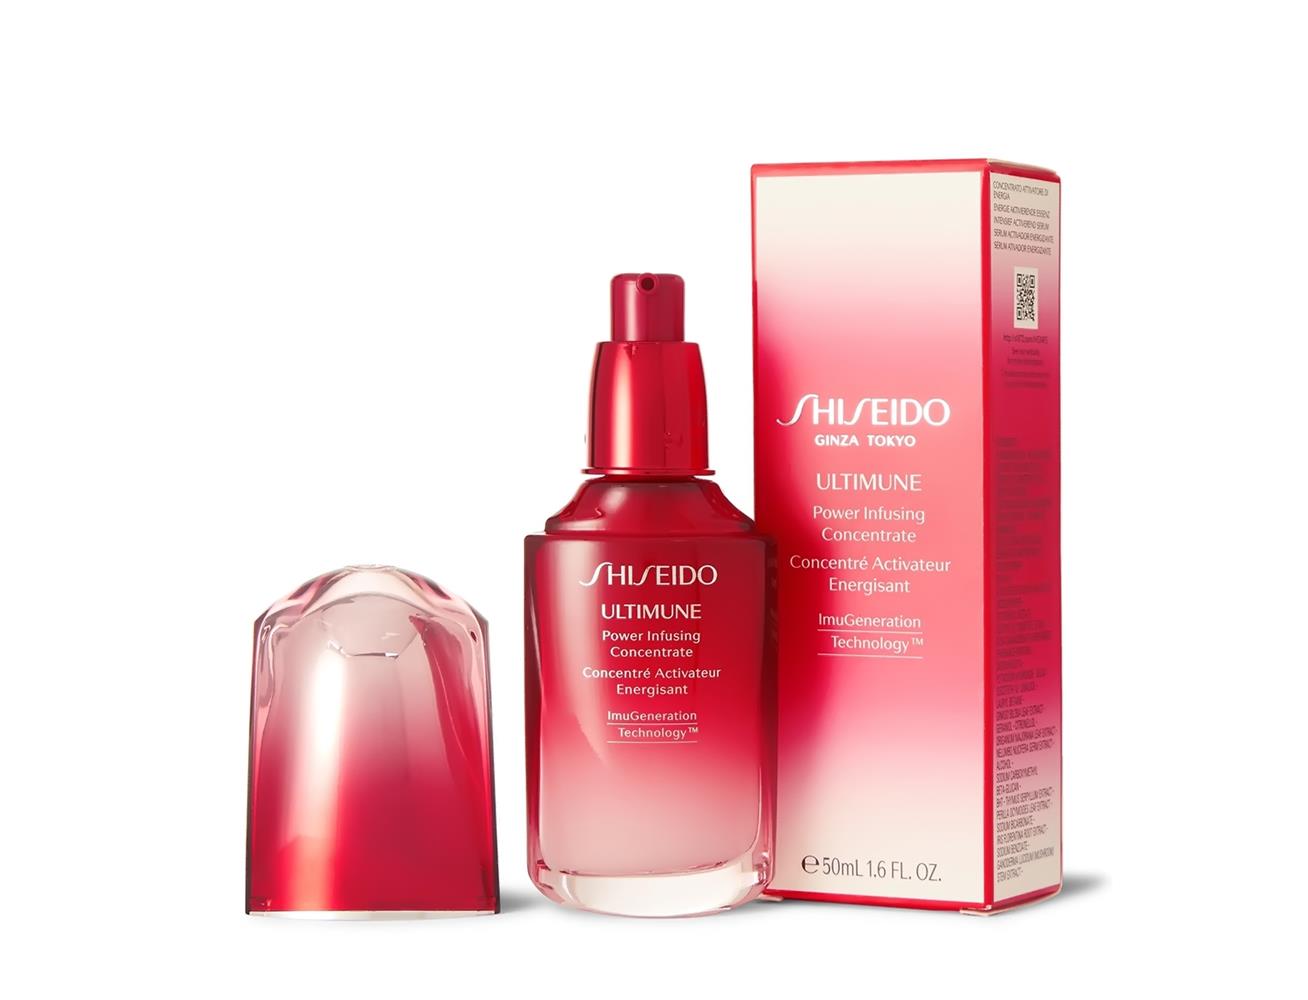 Ultimune концентрат шисейдо Power infusing. Концентрат Shiseido Ultimune Power infusing Concentrate. Сыворотка шисейдо. Шисейдо для волос. Shiseido для волос